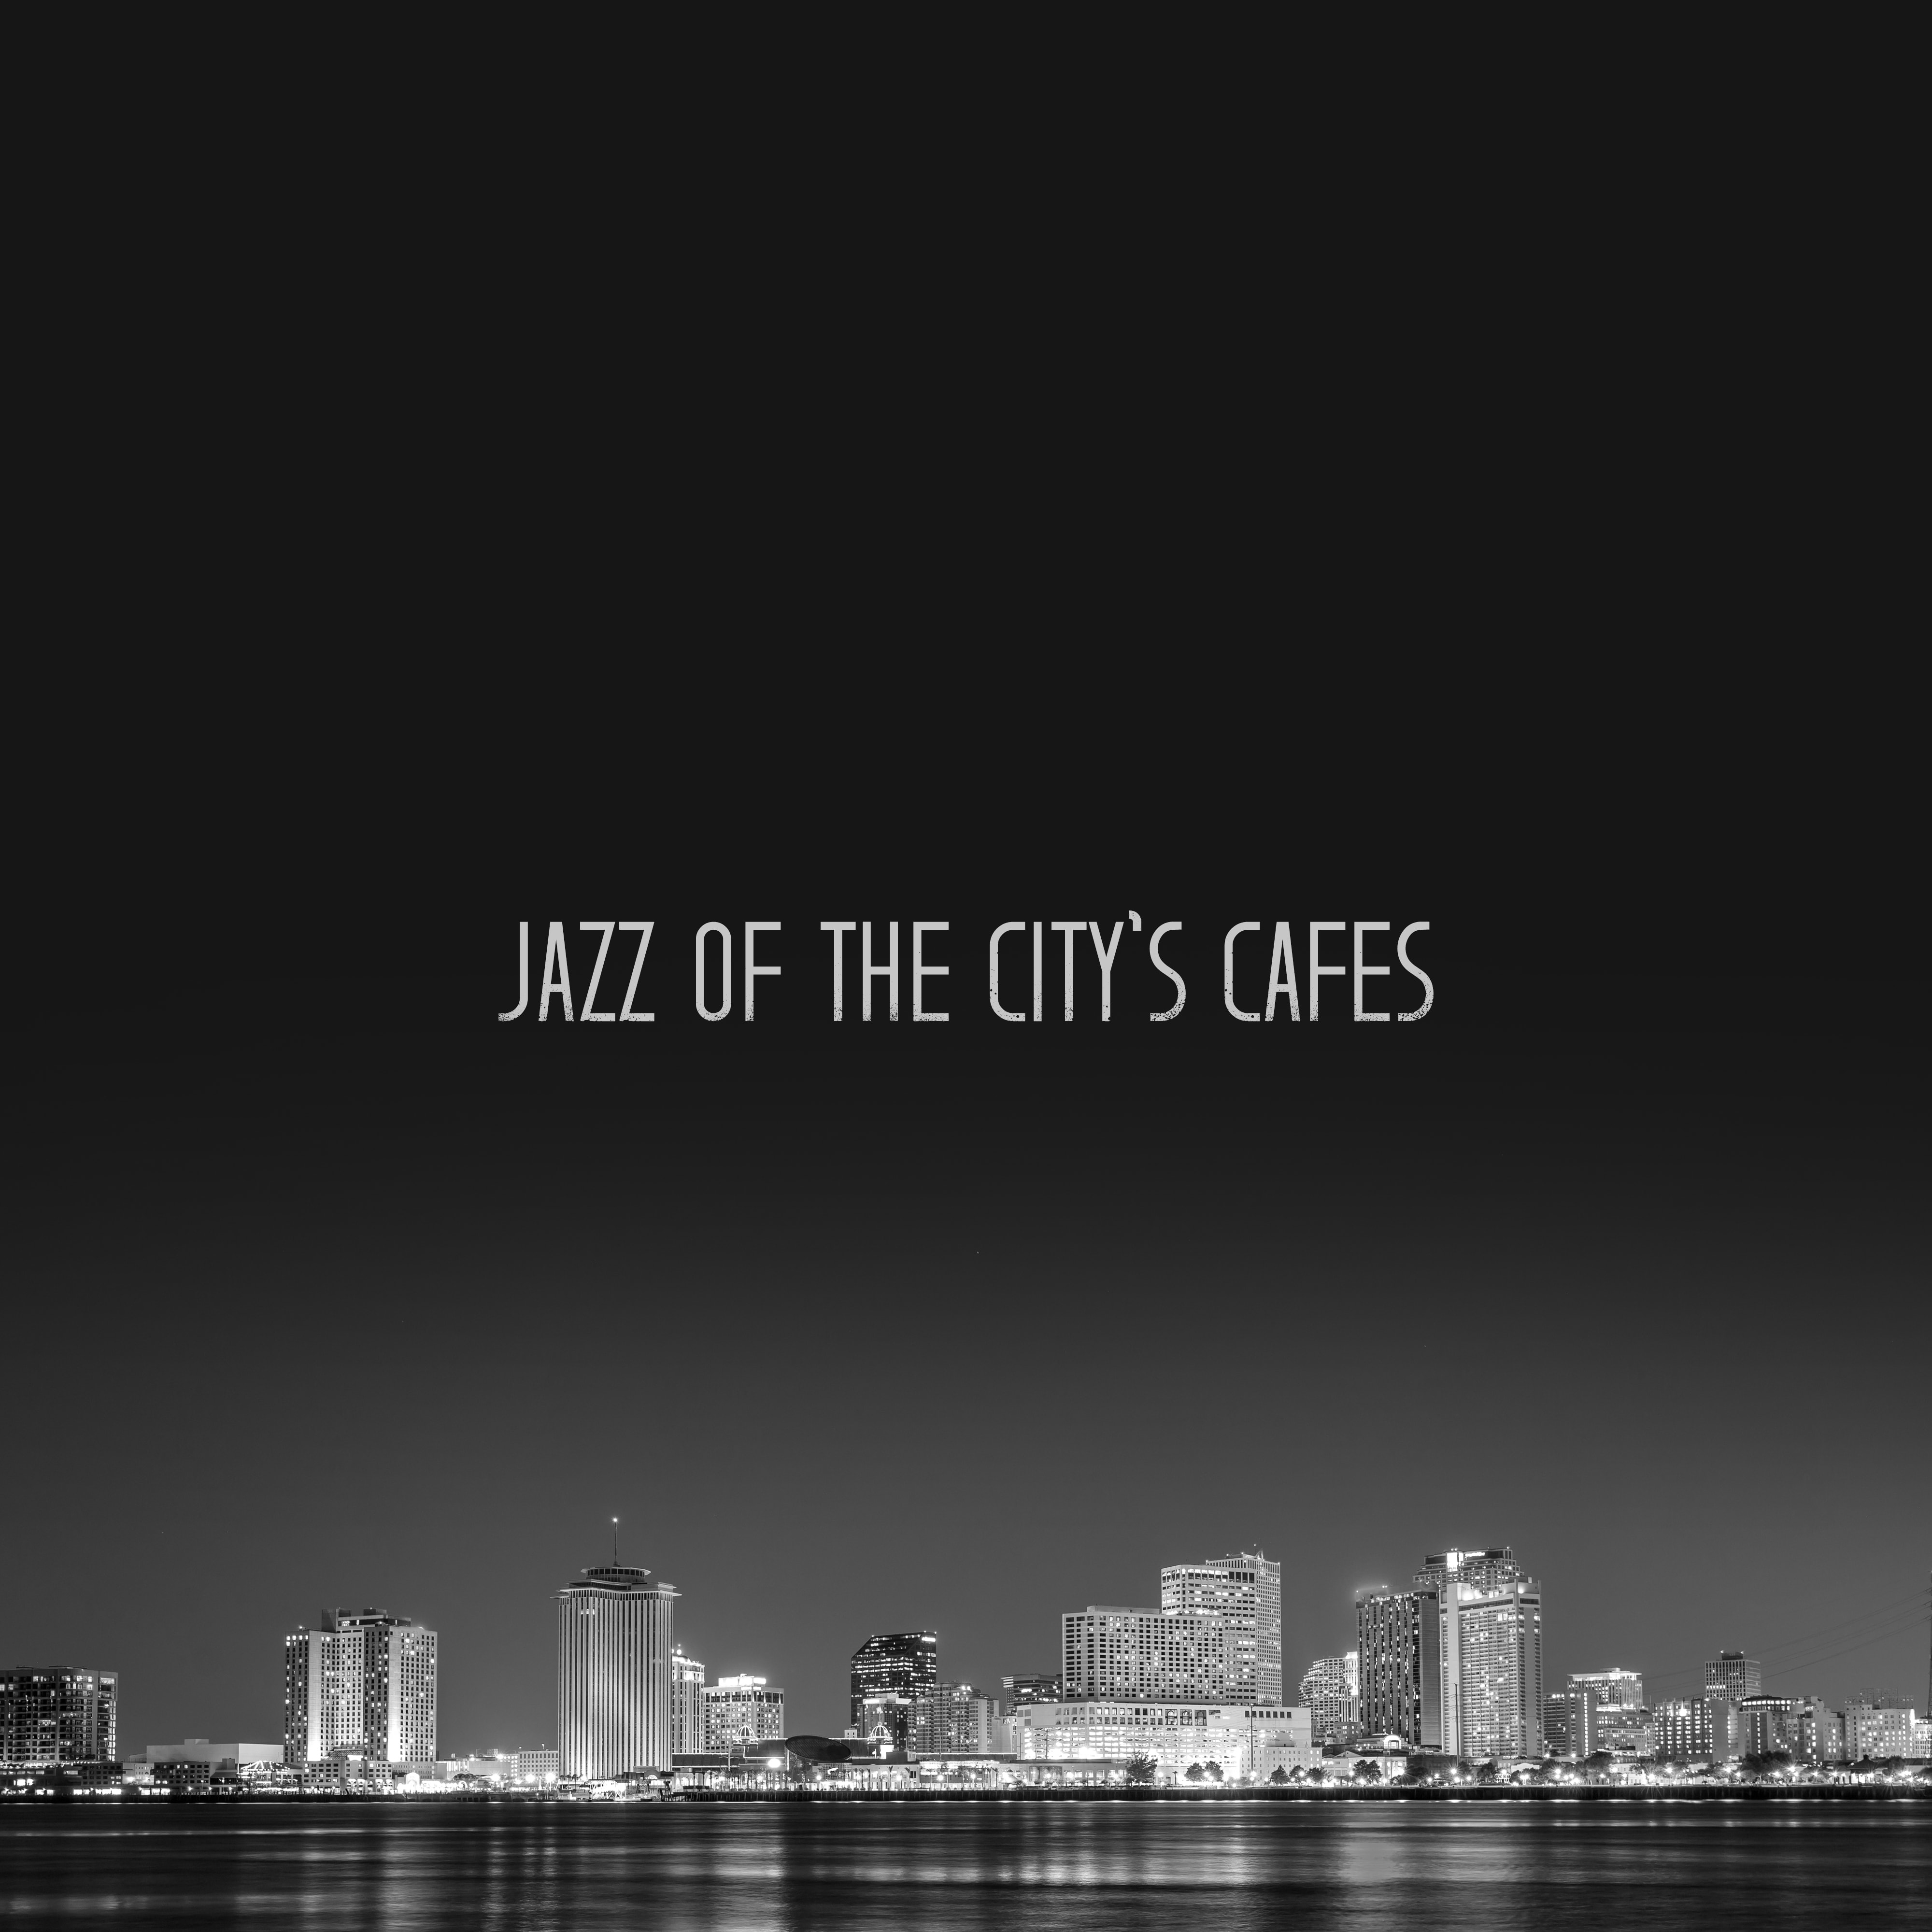 Jazz of the City's Cafes